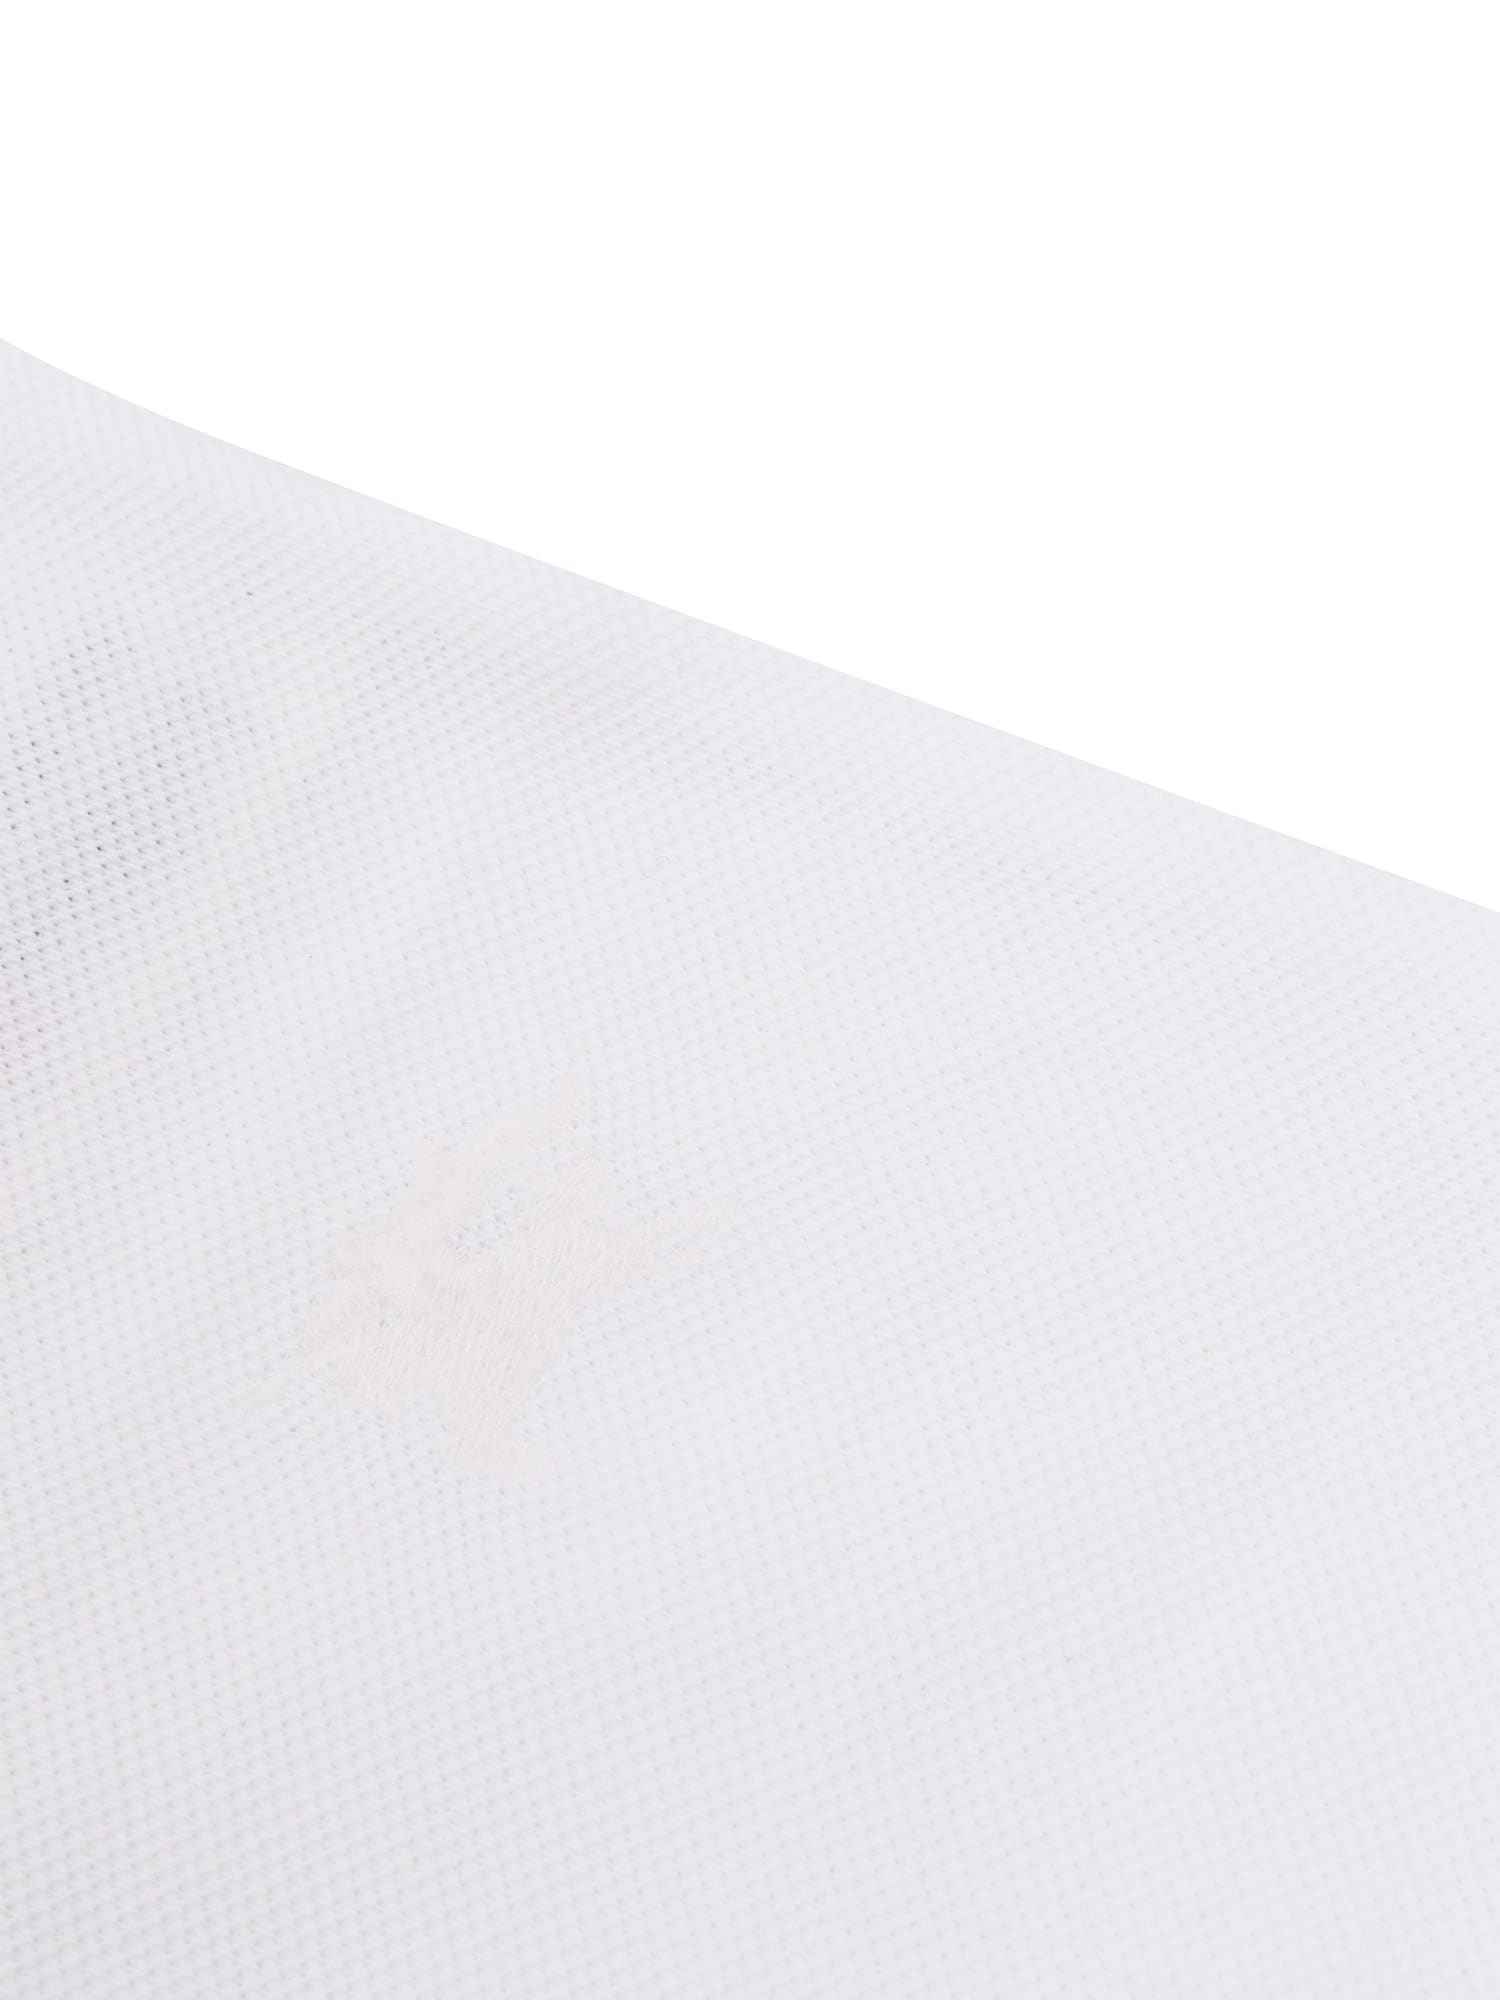 Shop Burberry Polo T-shirt In White